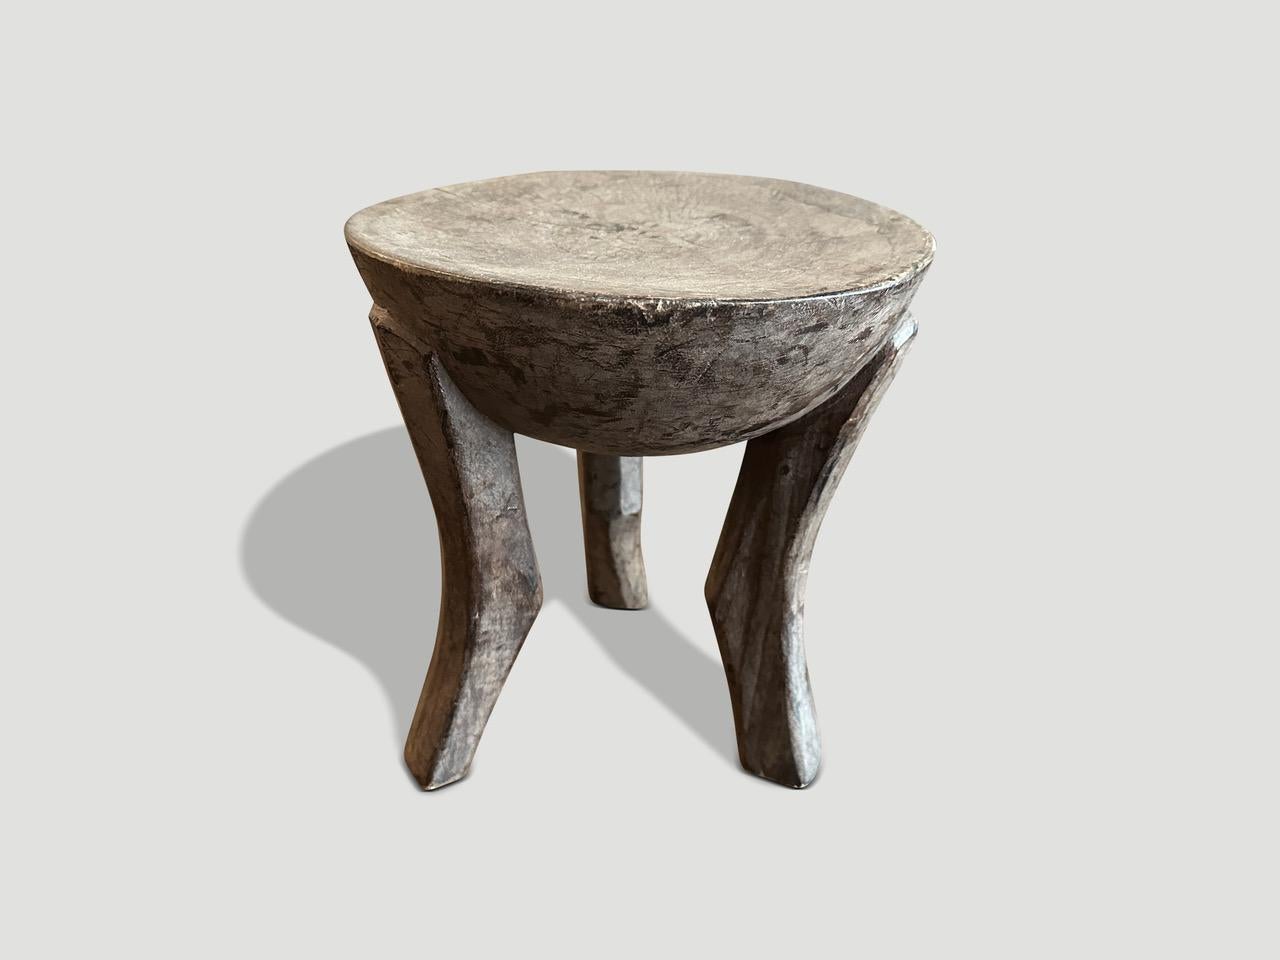 Antique African side table with milky wood tones. Hand carved from a single block of wood.

This side table was sourced in the spirit of Wabi-Sabi, a Japanese philosophy that beauty can be found in imperfection and impermanence. It is a beauty of